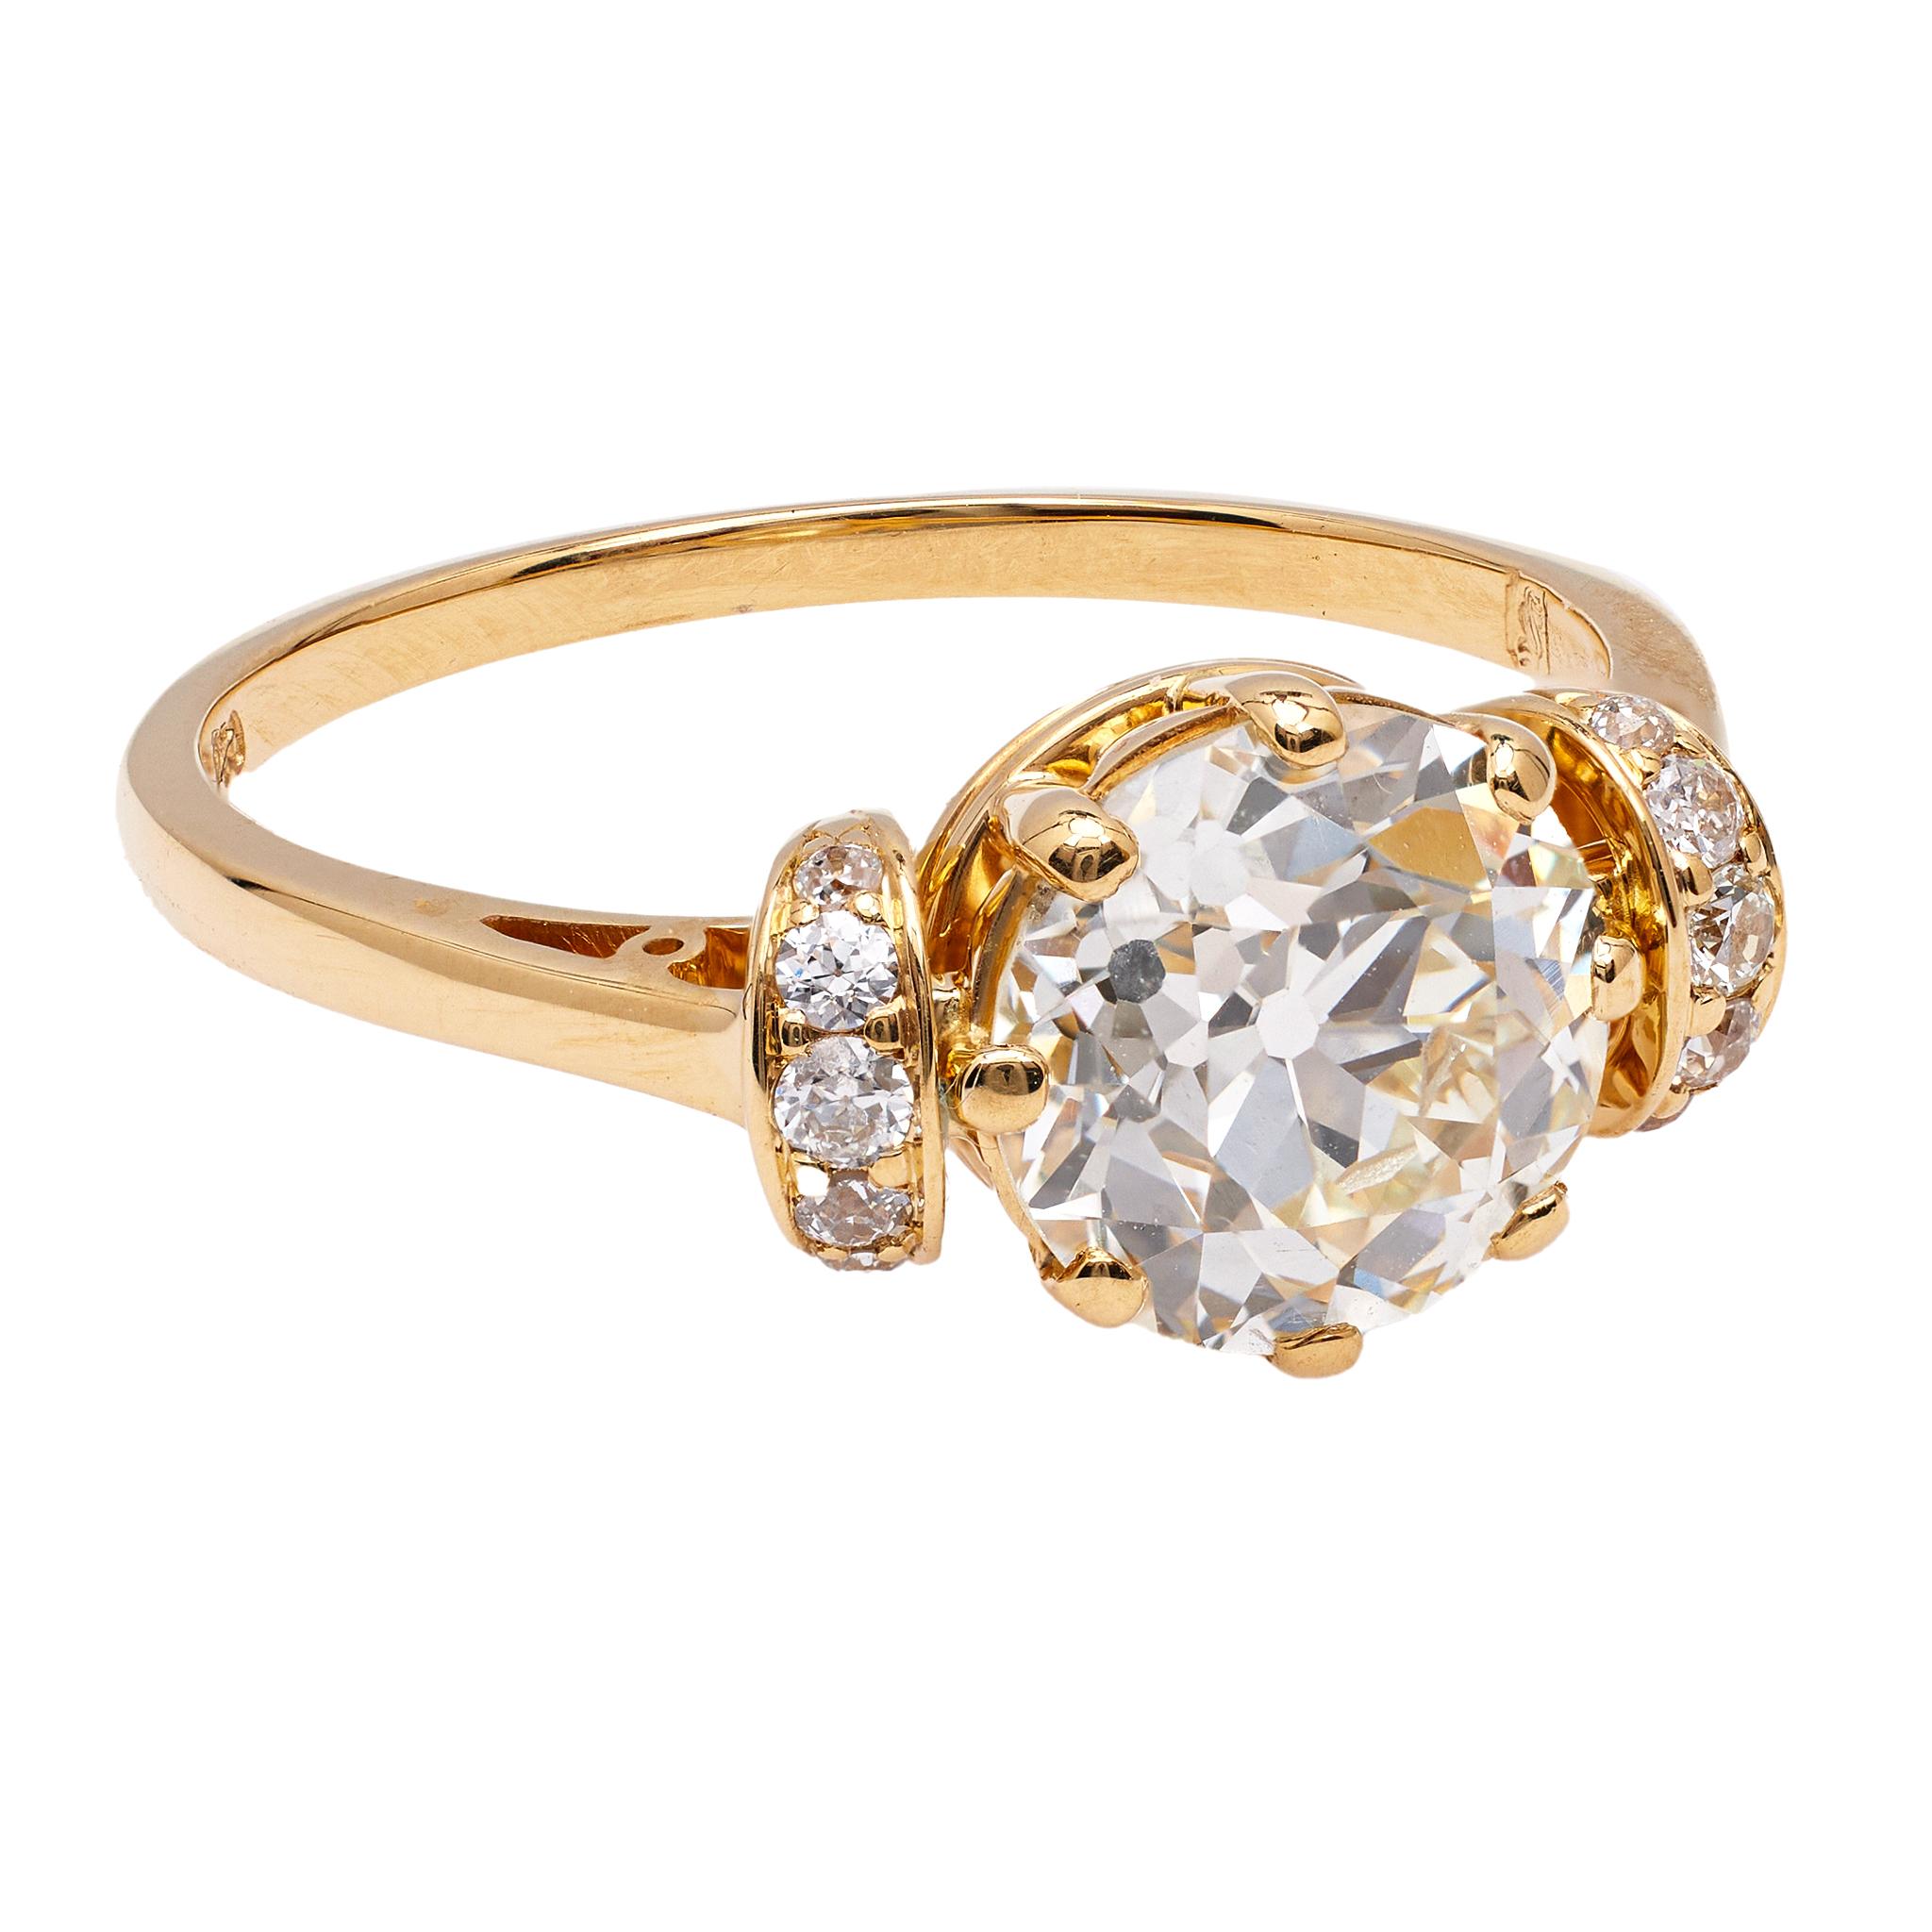 Antique Inspired GIA 1.80 Carat Old European Cut Diamond 18k Yellow Gold Ring For Sale 1